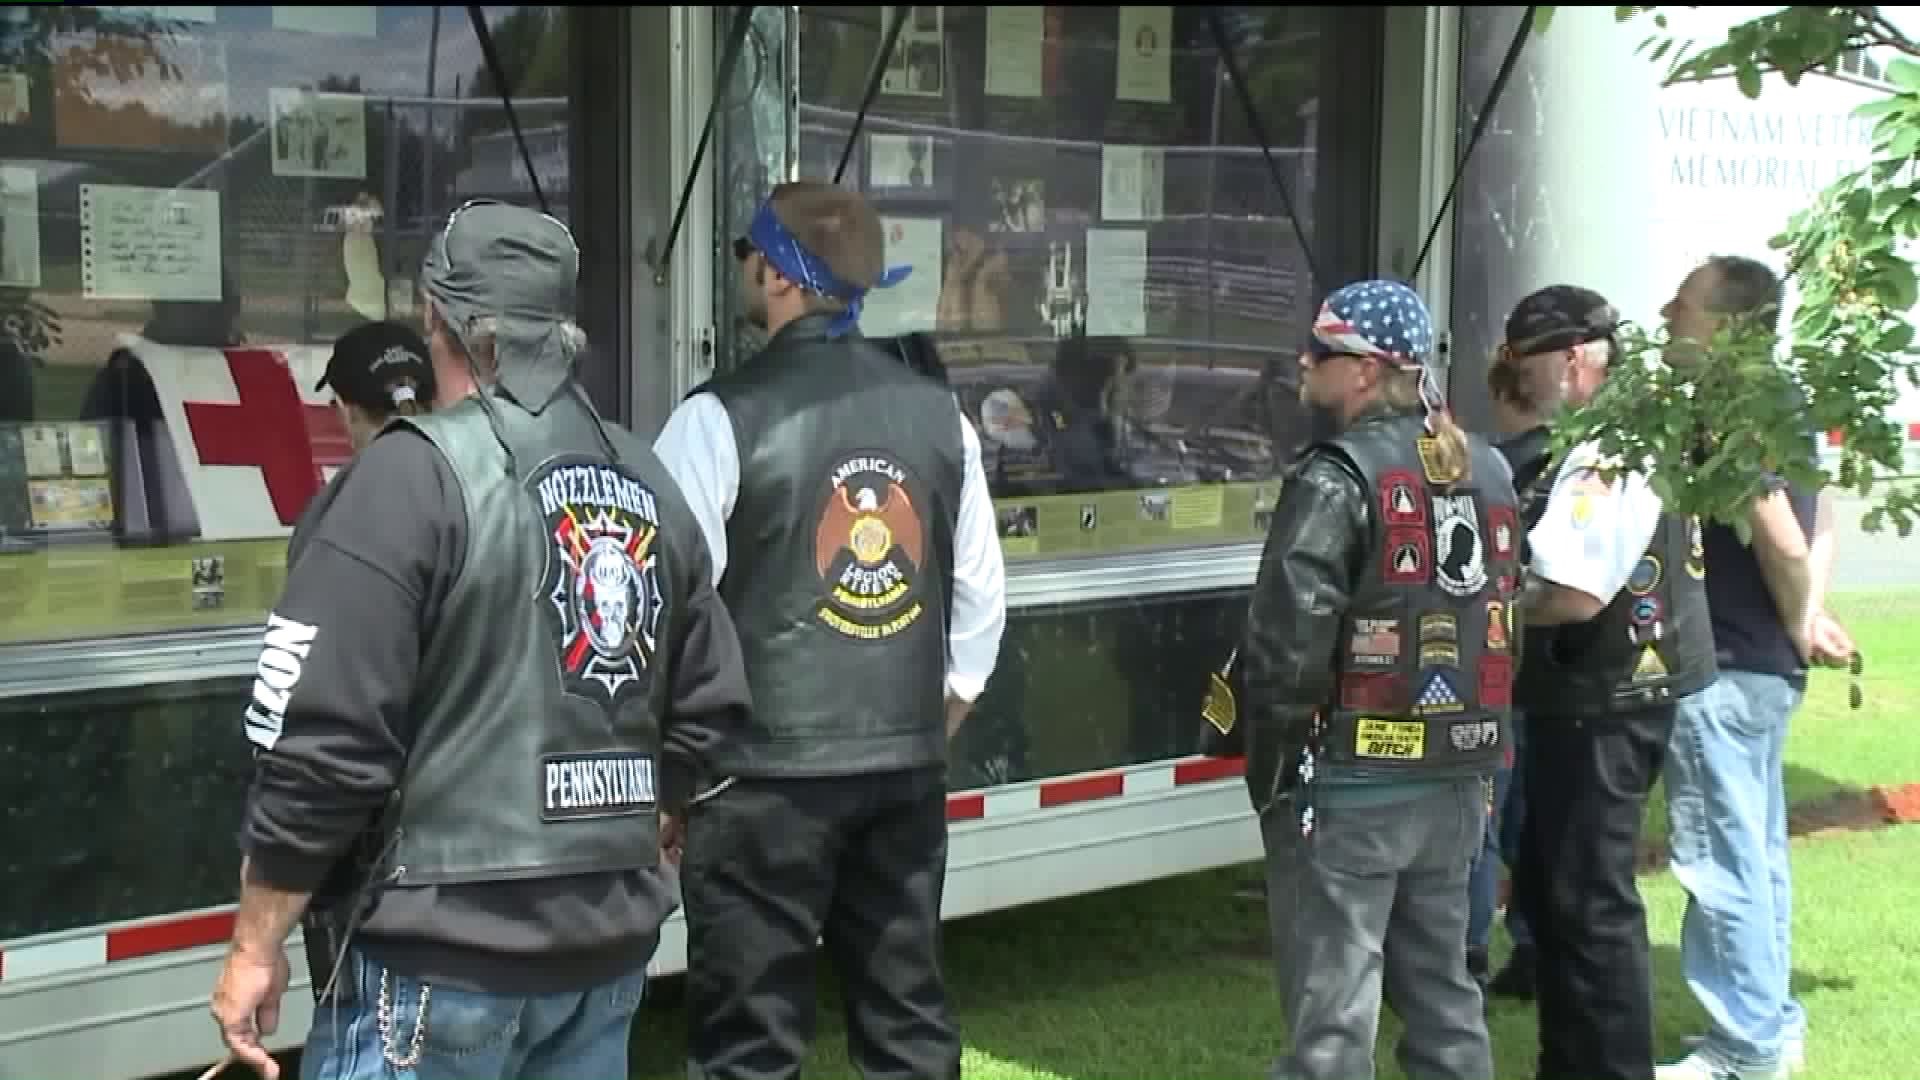 Traveling War Memorial Stops in Luzerne County, Brings Woman to Tears